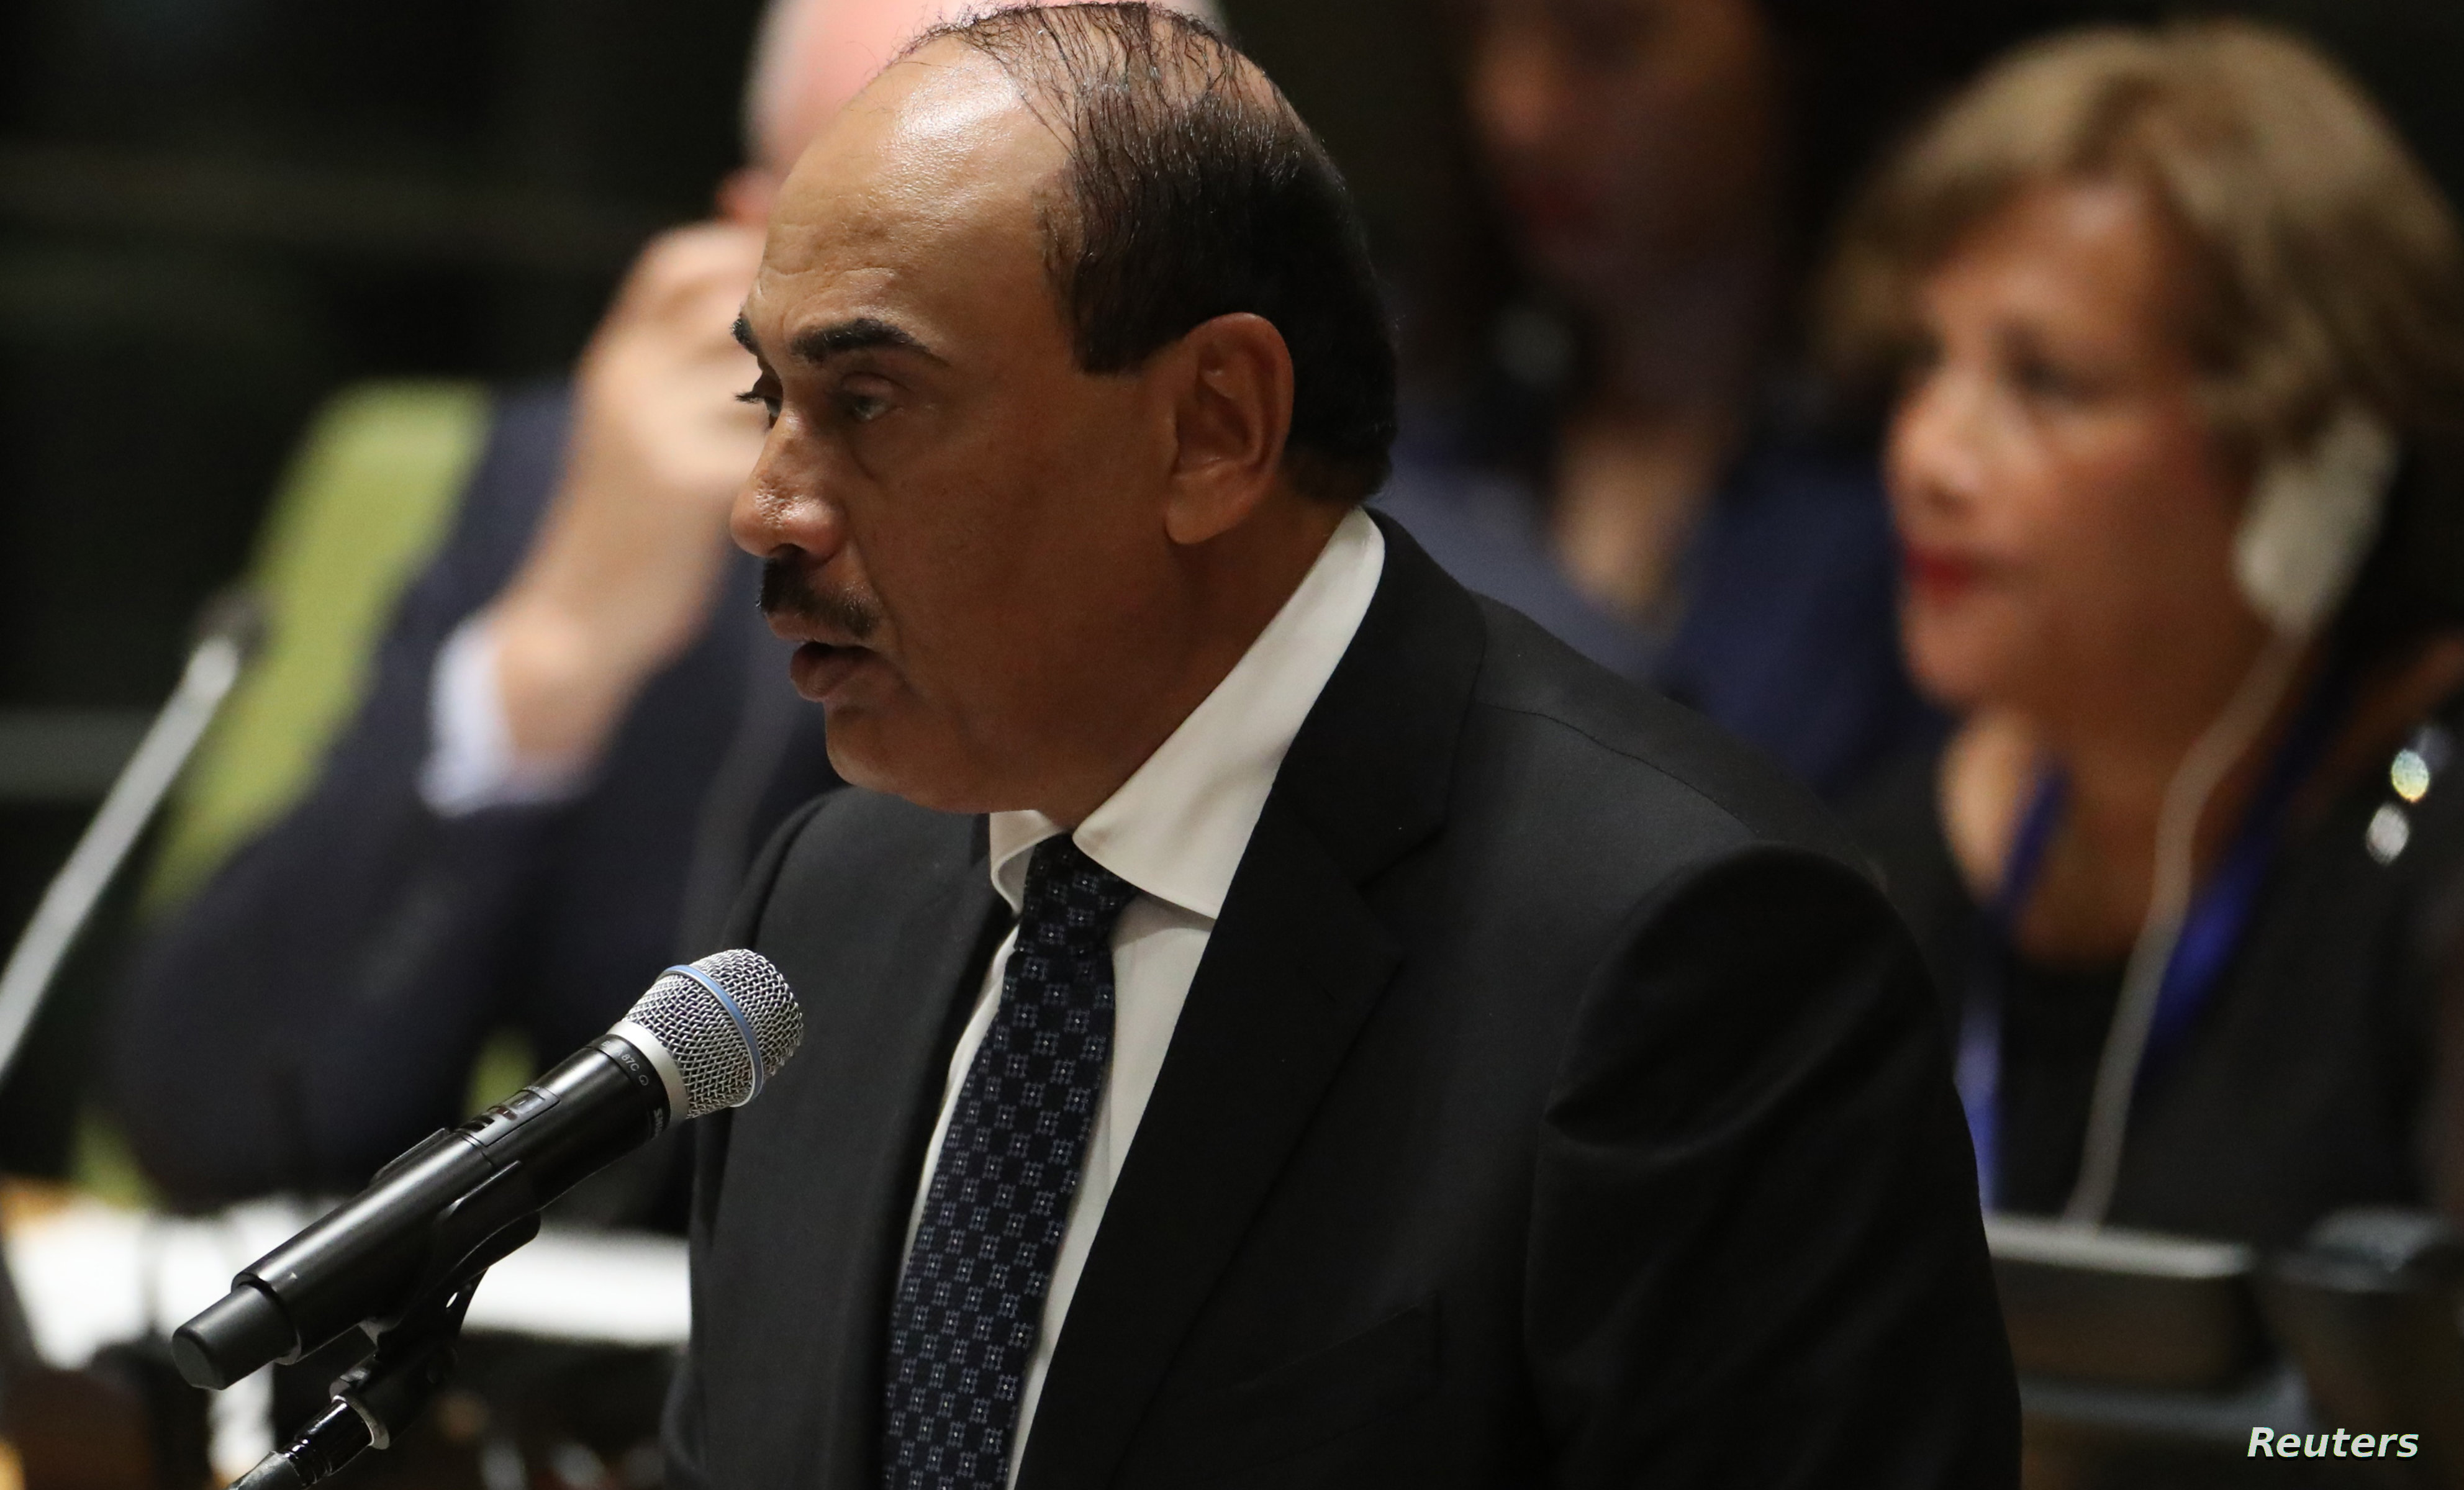 Deputy Prime Minister Sabah Al-Khalid Al-Sabah of Kuwait speaks during a high-level meeting on addressing large movements of refugees and migrants at the United Nations General Assembly in New York